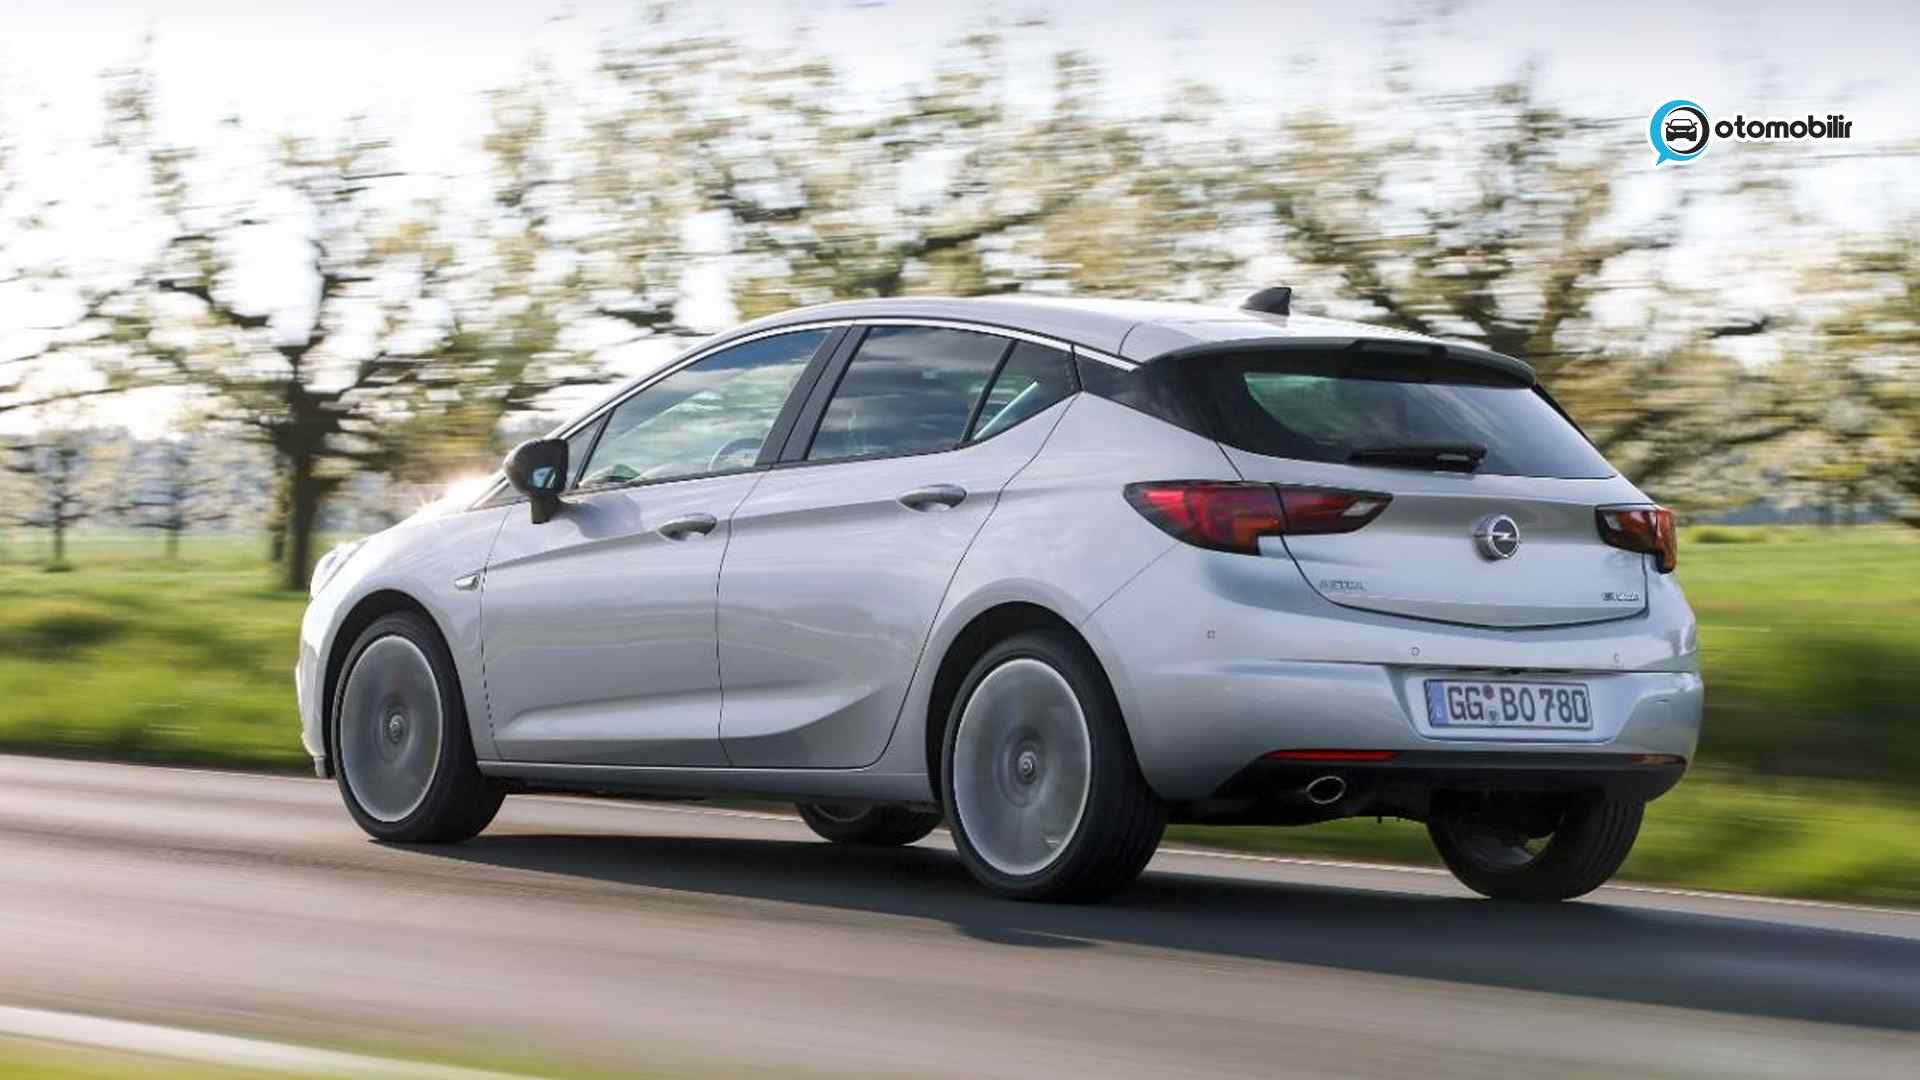 Opel Astra HB